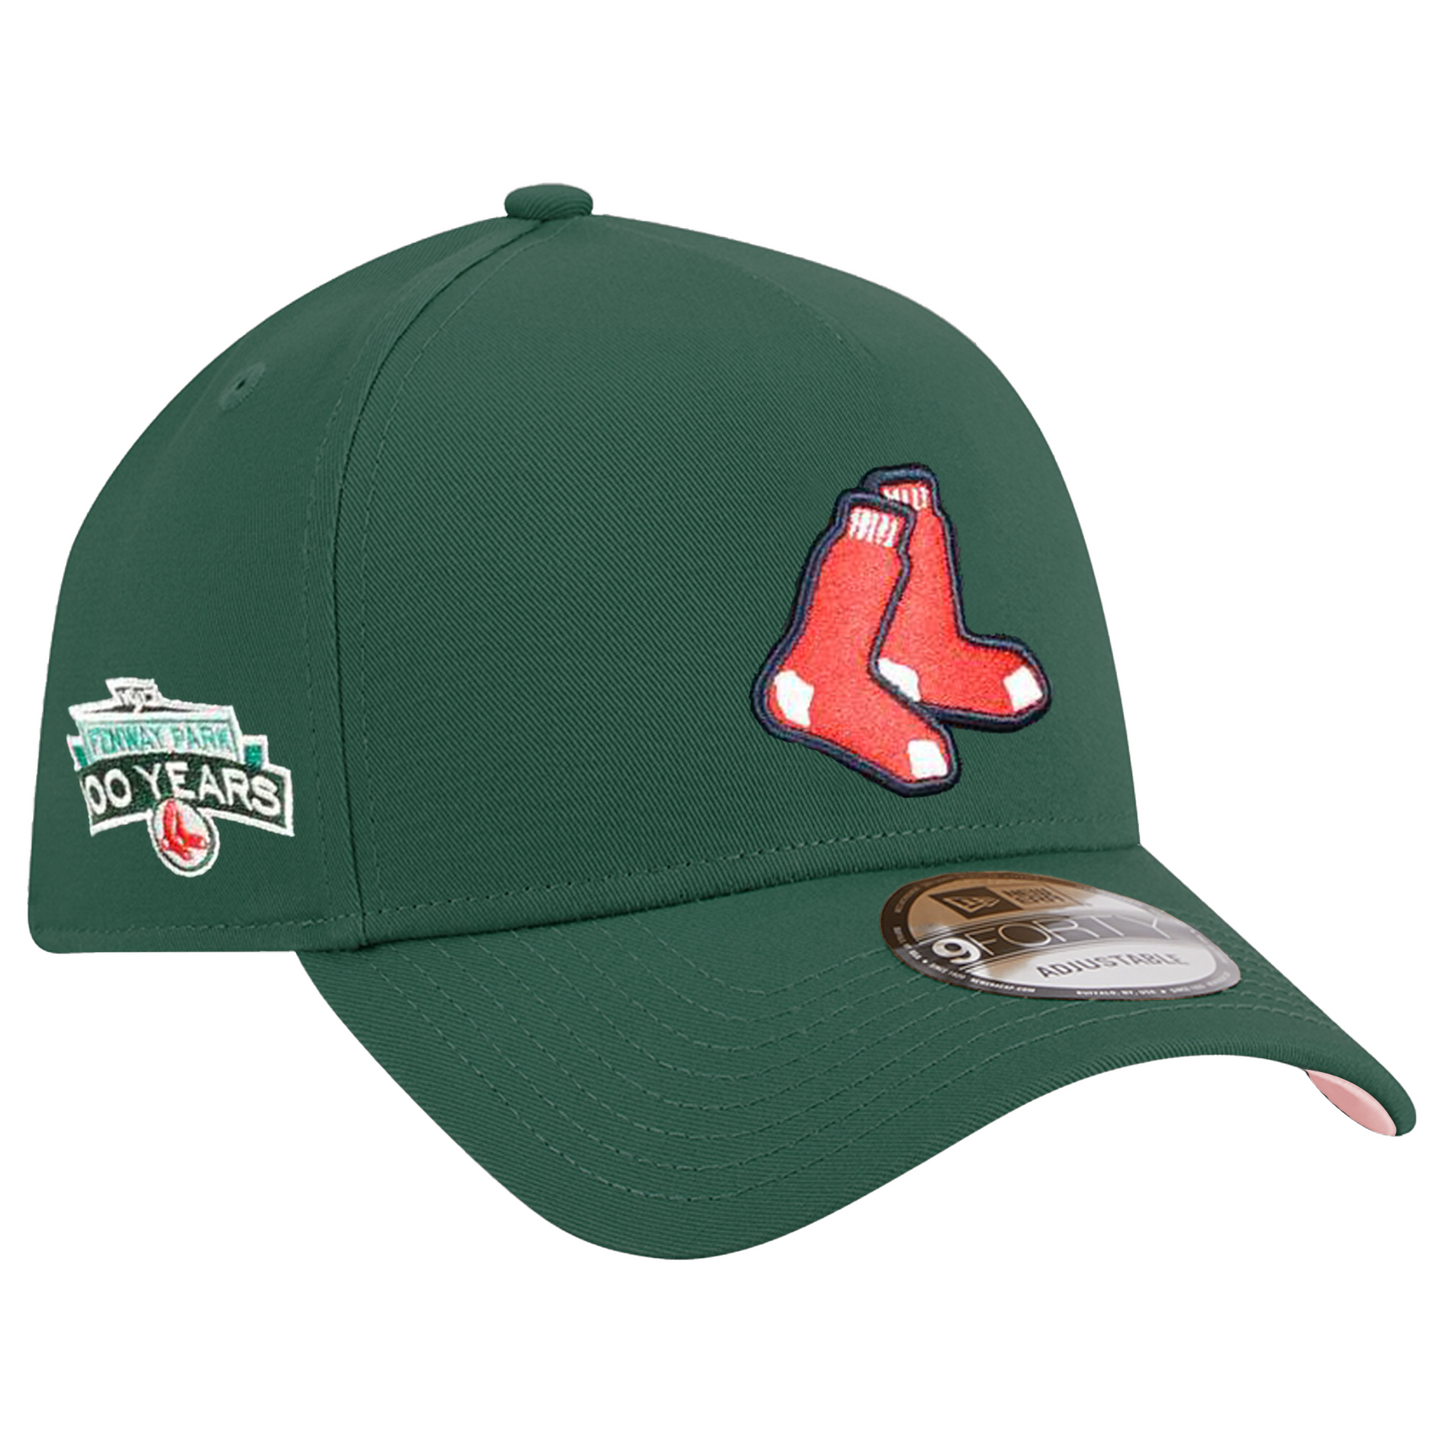 New Era 9FORTY Boston Red Sox Sidepatch Snapback